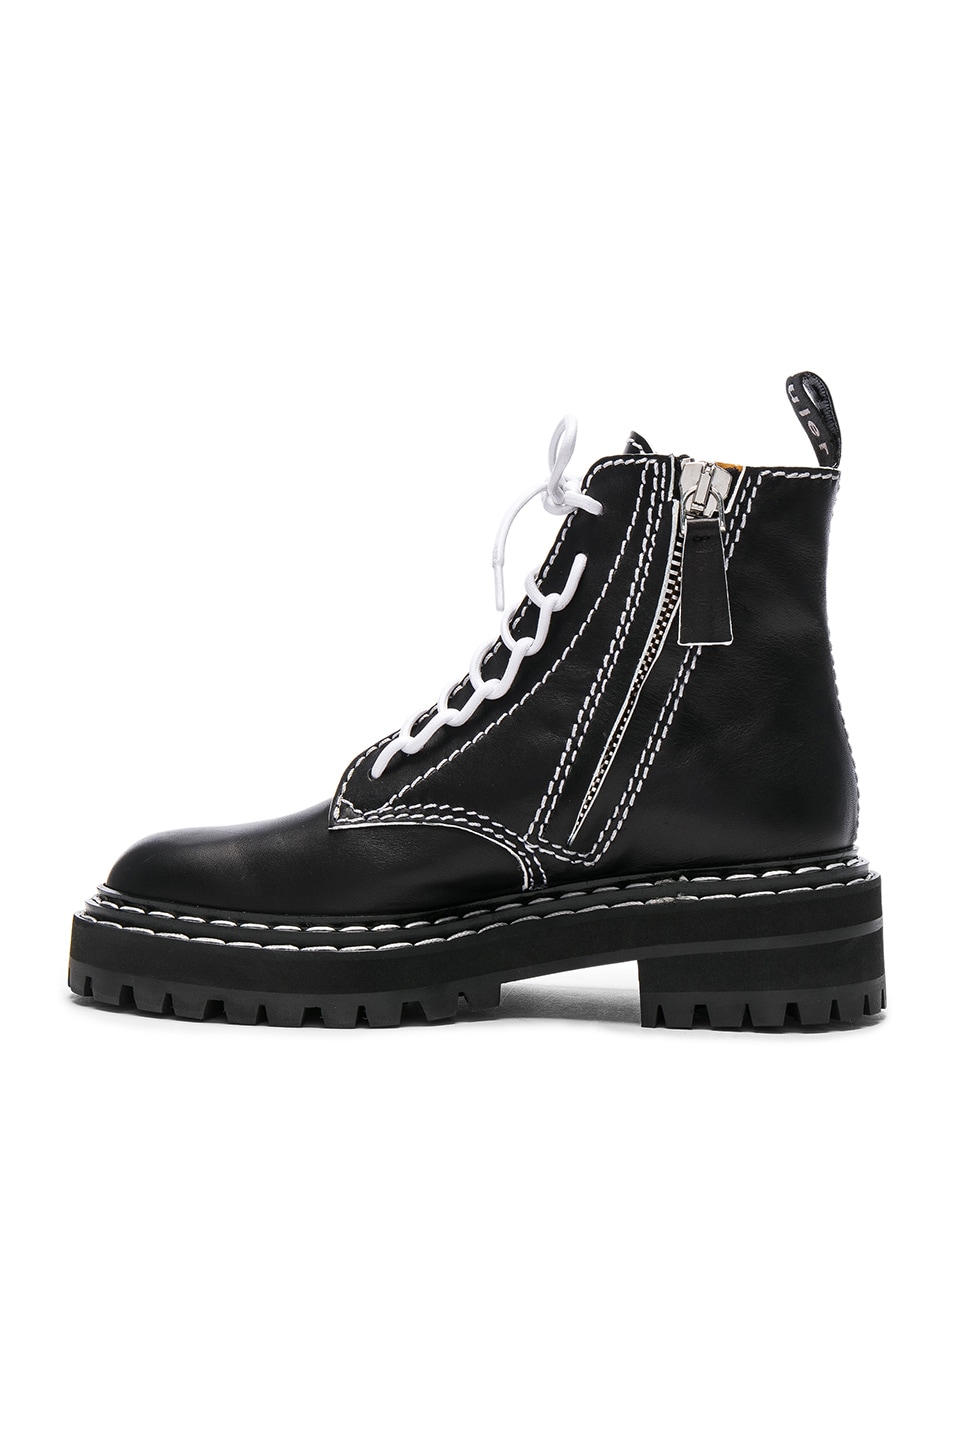 PROENZA SCHOULER Laced Up Leather Ankle Boots in Black | ModeSens